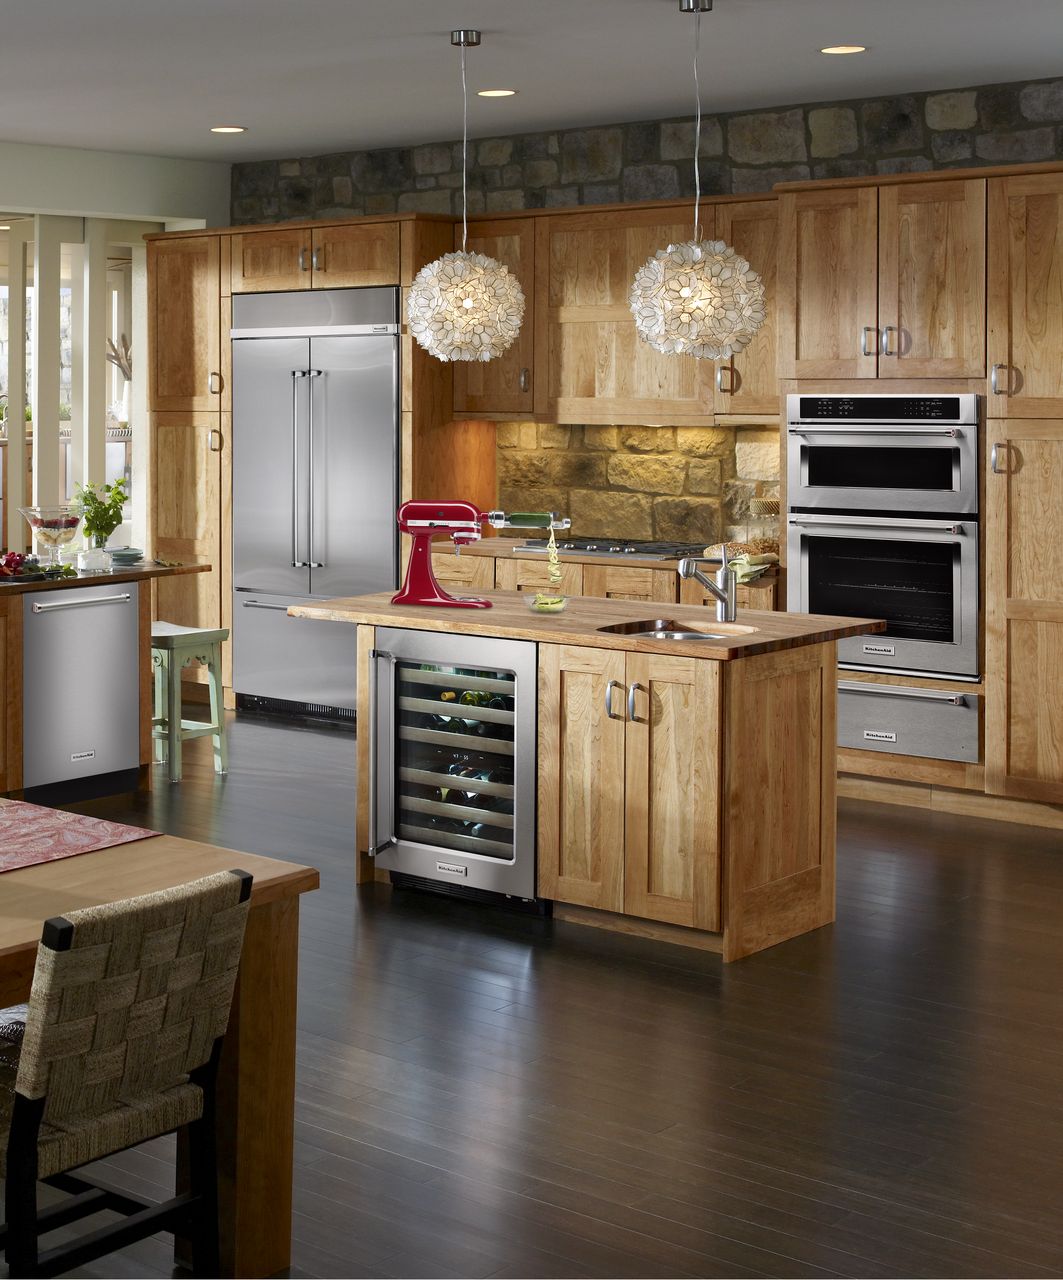 Are Your Appliances Summer Ready?